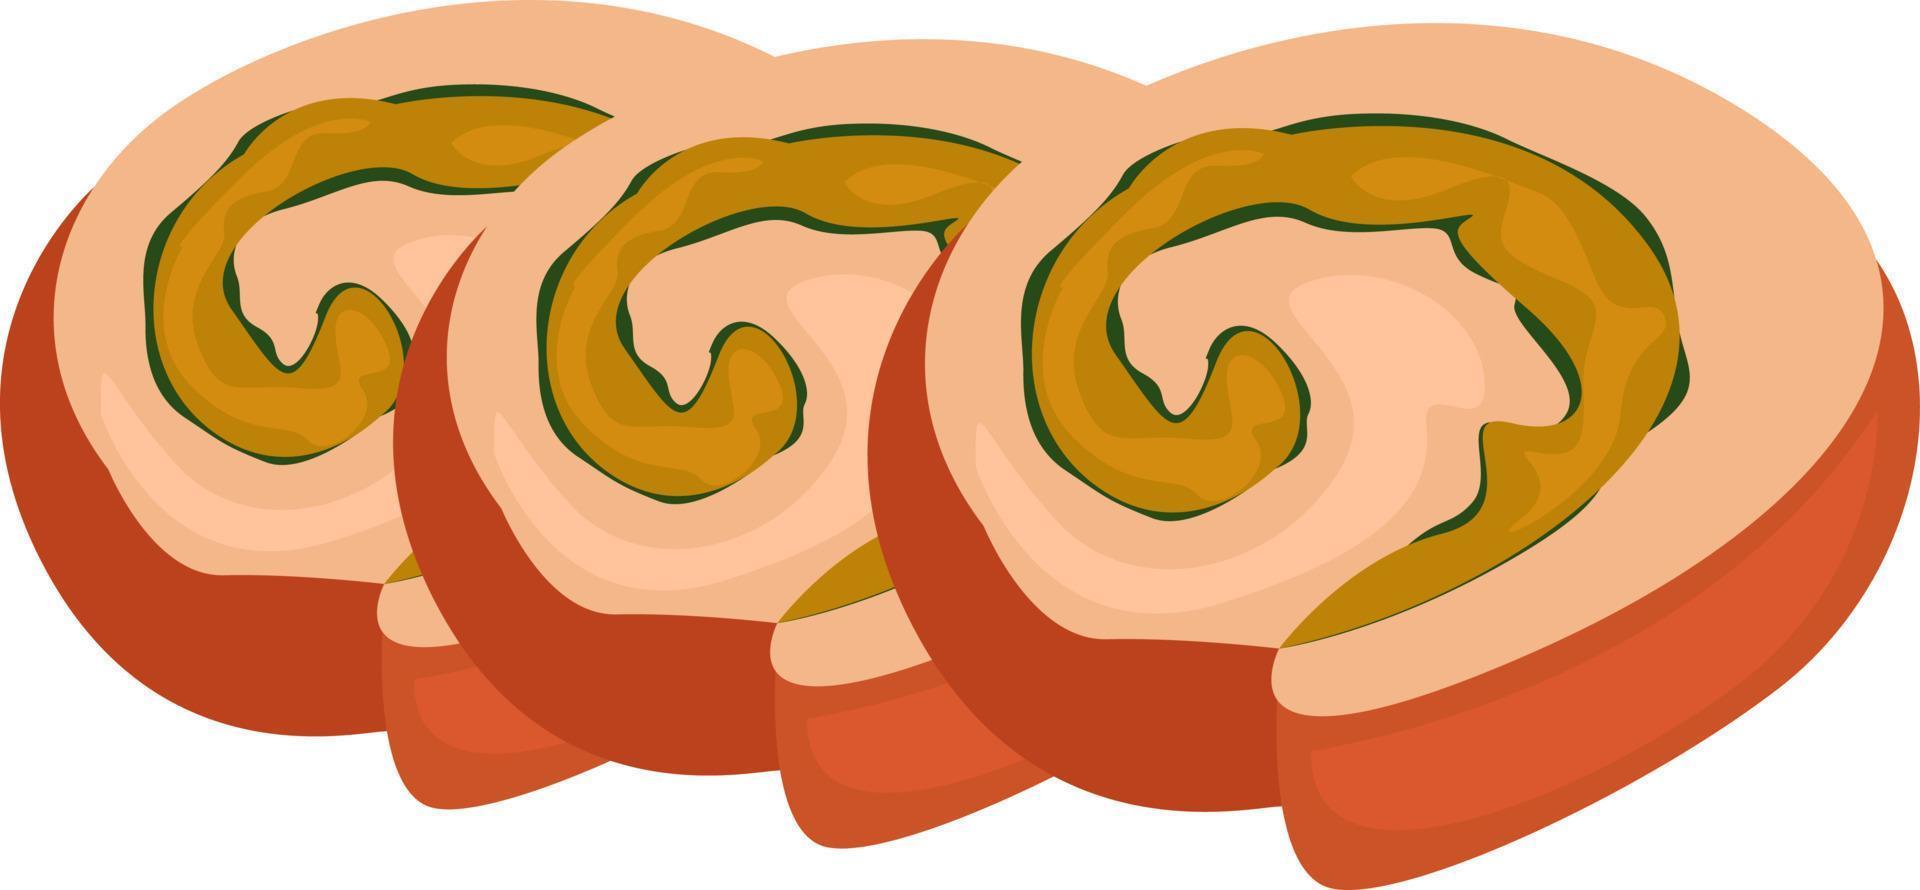 Meatloaf pieces, illustration, vector on white background